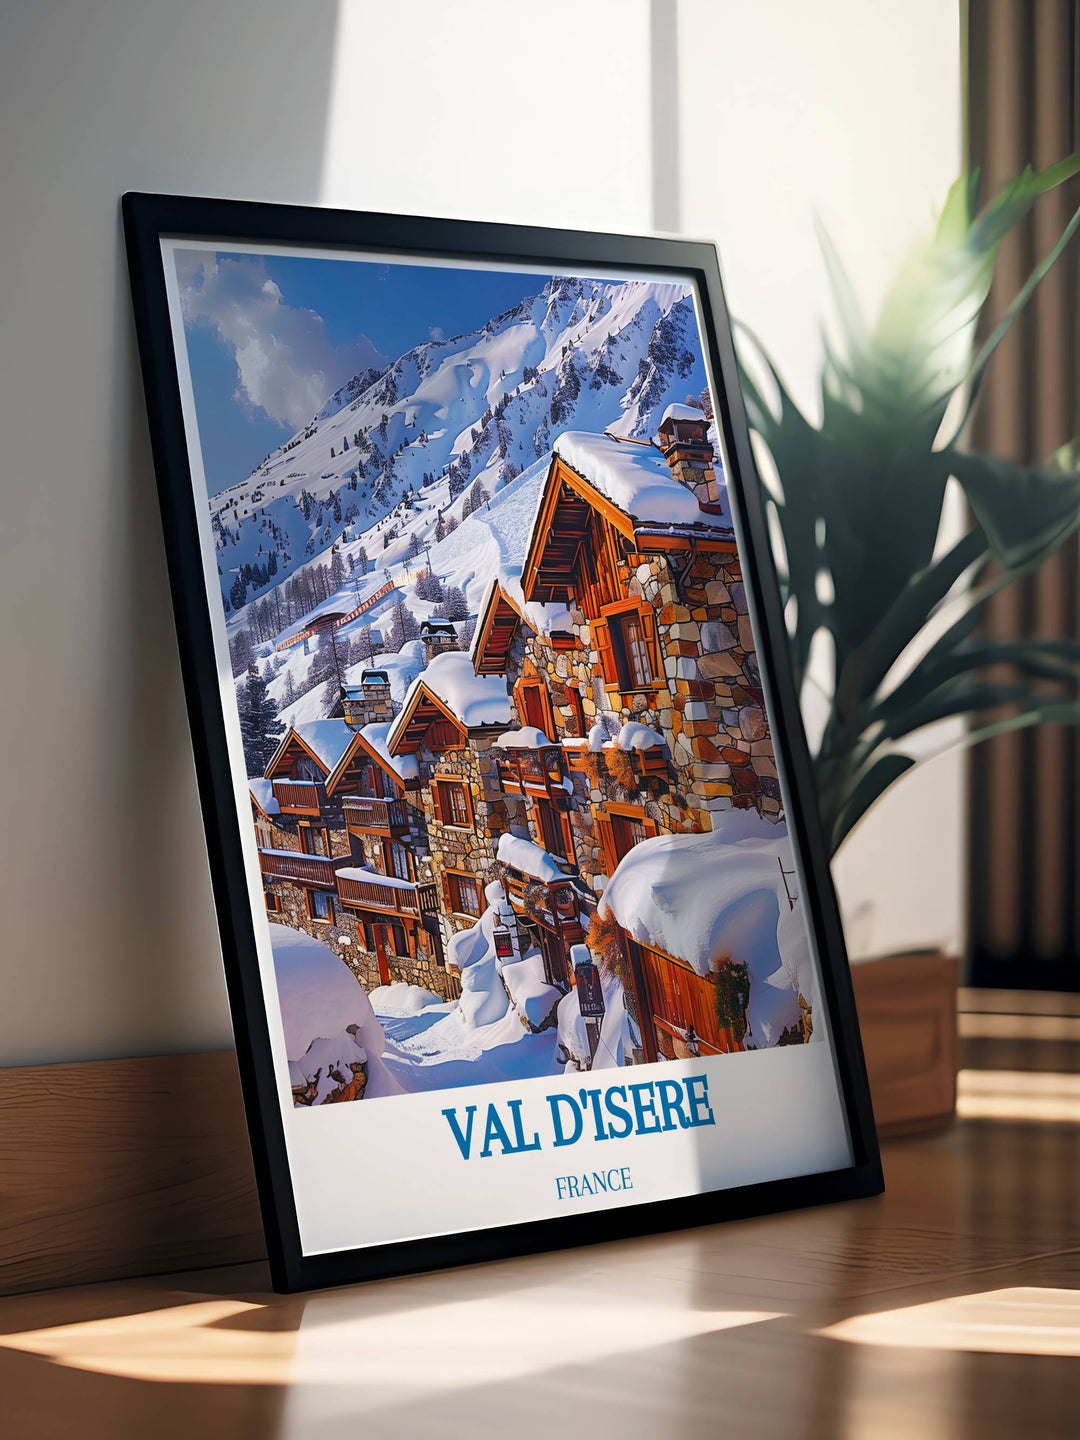 French Alps travel poster depicting Val dIsère le Fornet, a premier ski destination. Captures the excitement and beauty of Val dIsère, inspiring dreams of winter adventures.